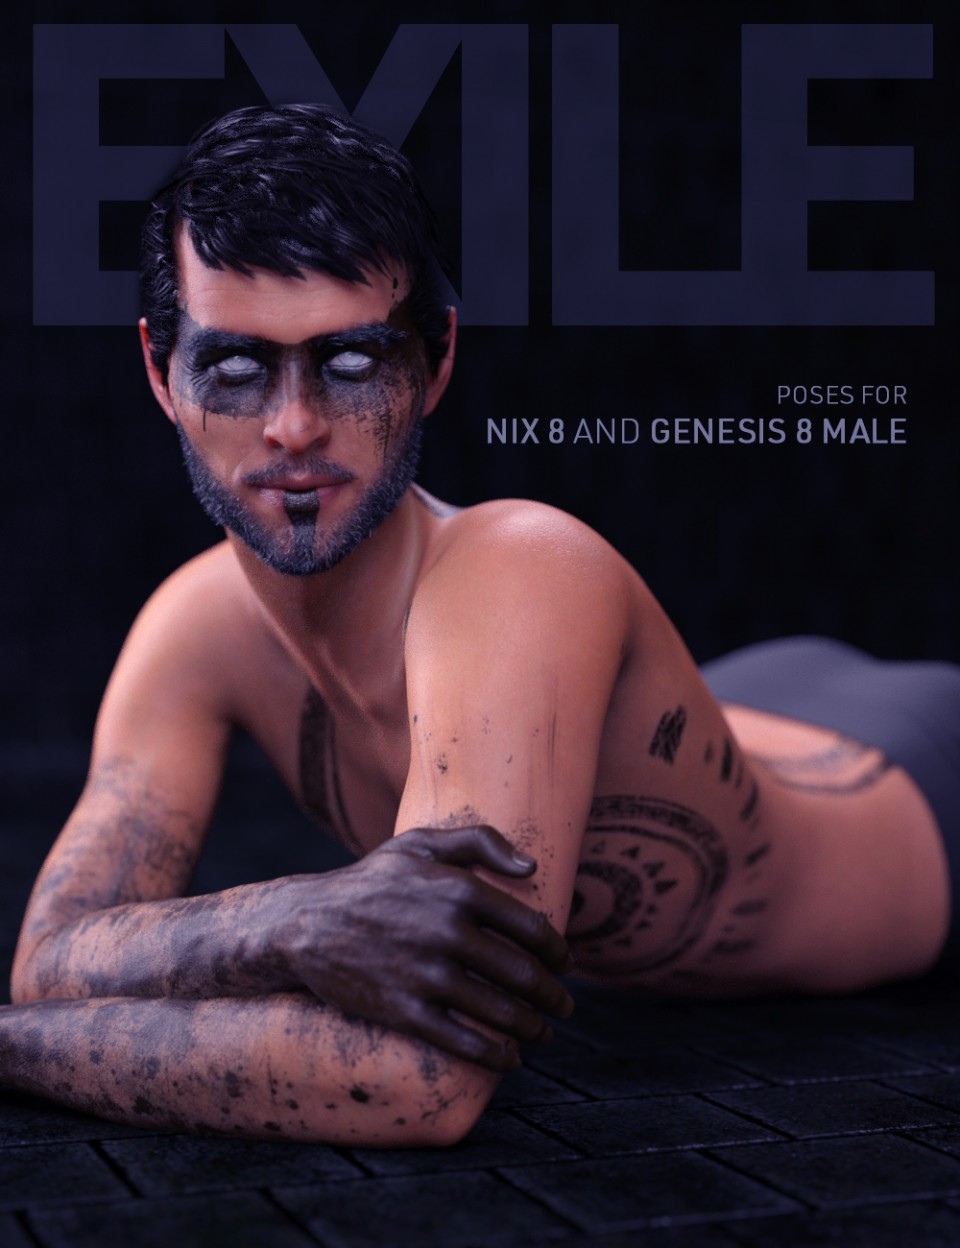 Exile Poses for Nix 8 and Genesis 8 Male_DAZ3D下载站